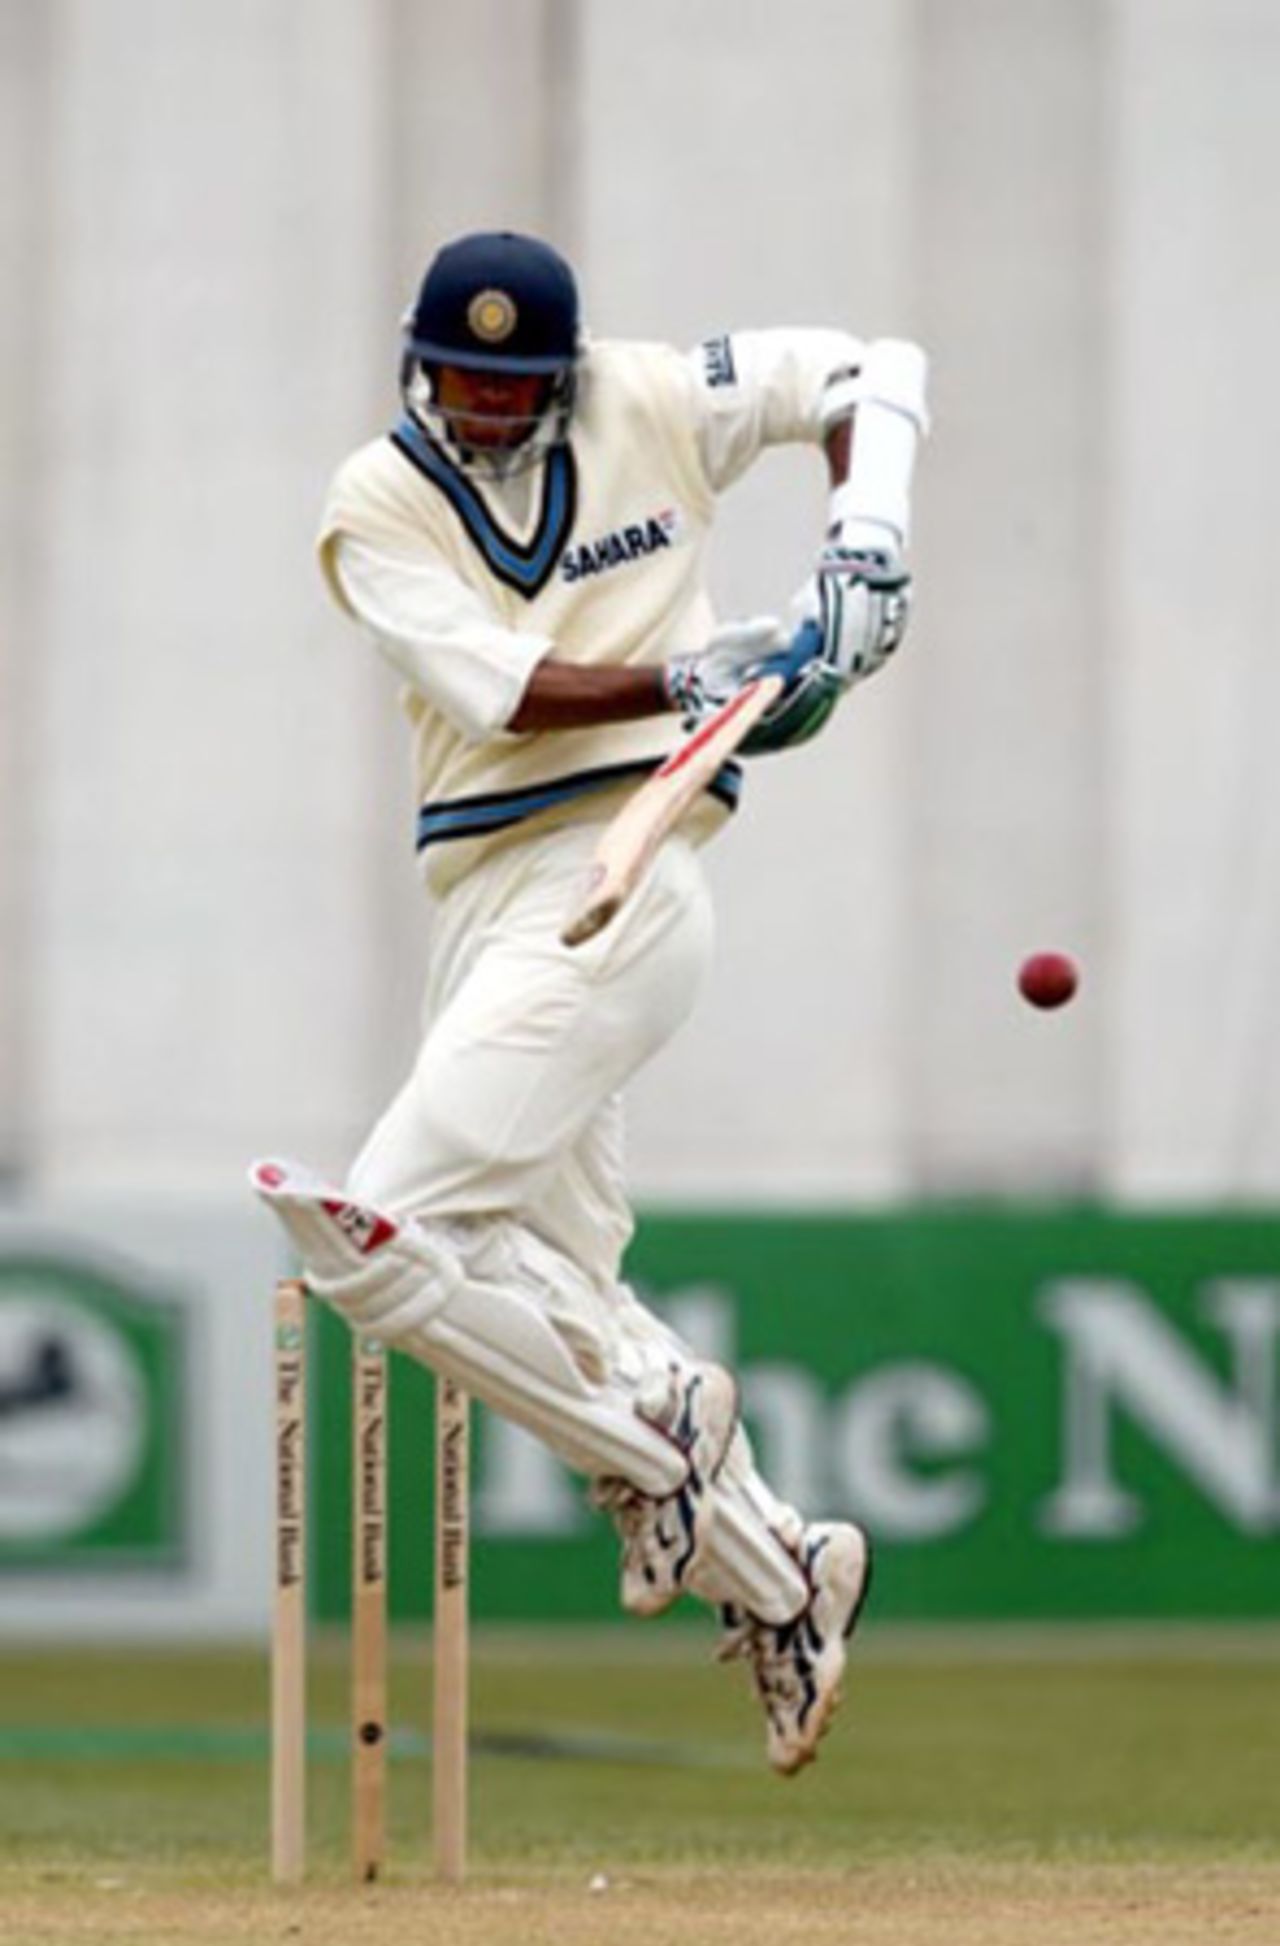 Indian batsman Rahul Dravid jumps to fend a short delivery down into the leg side during his first innings of 76. 1st Test: New Zealand v India at Basin Reserve, Wellington, 12-16 December 2002 (12 December 2002).